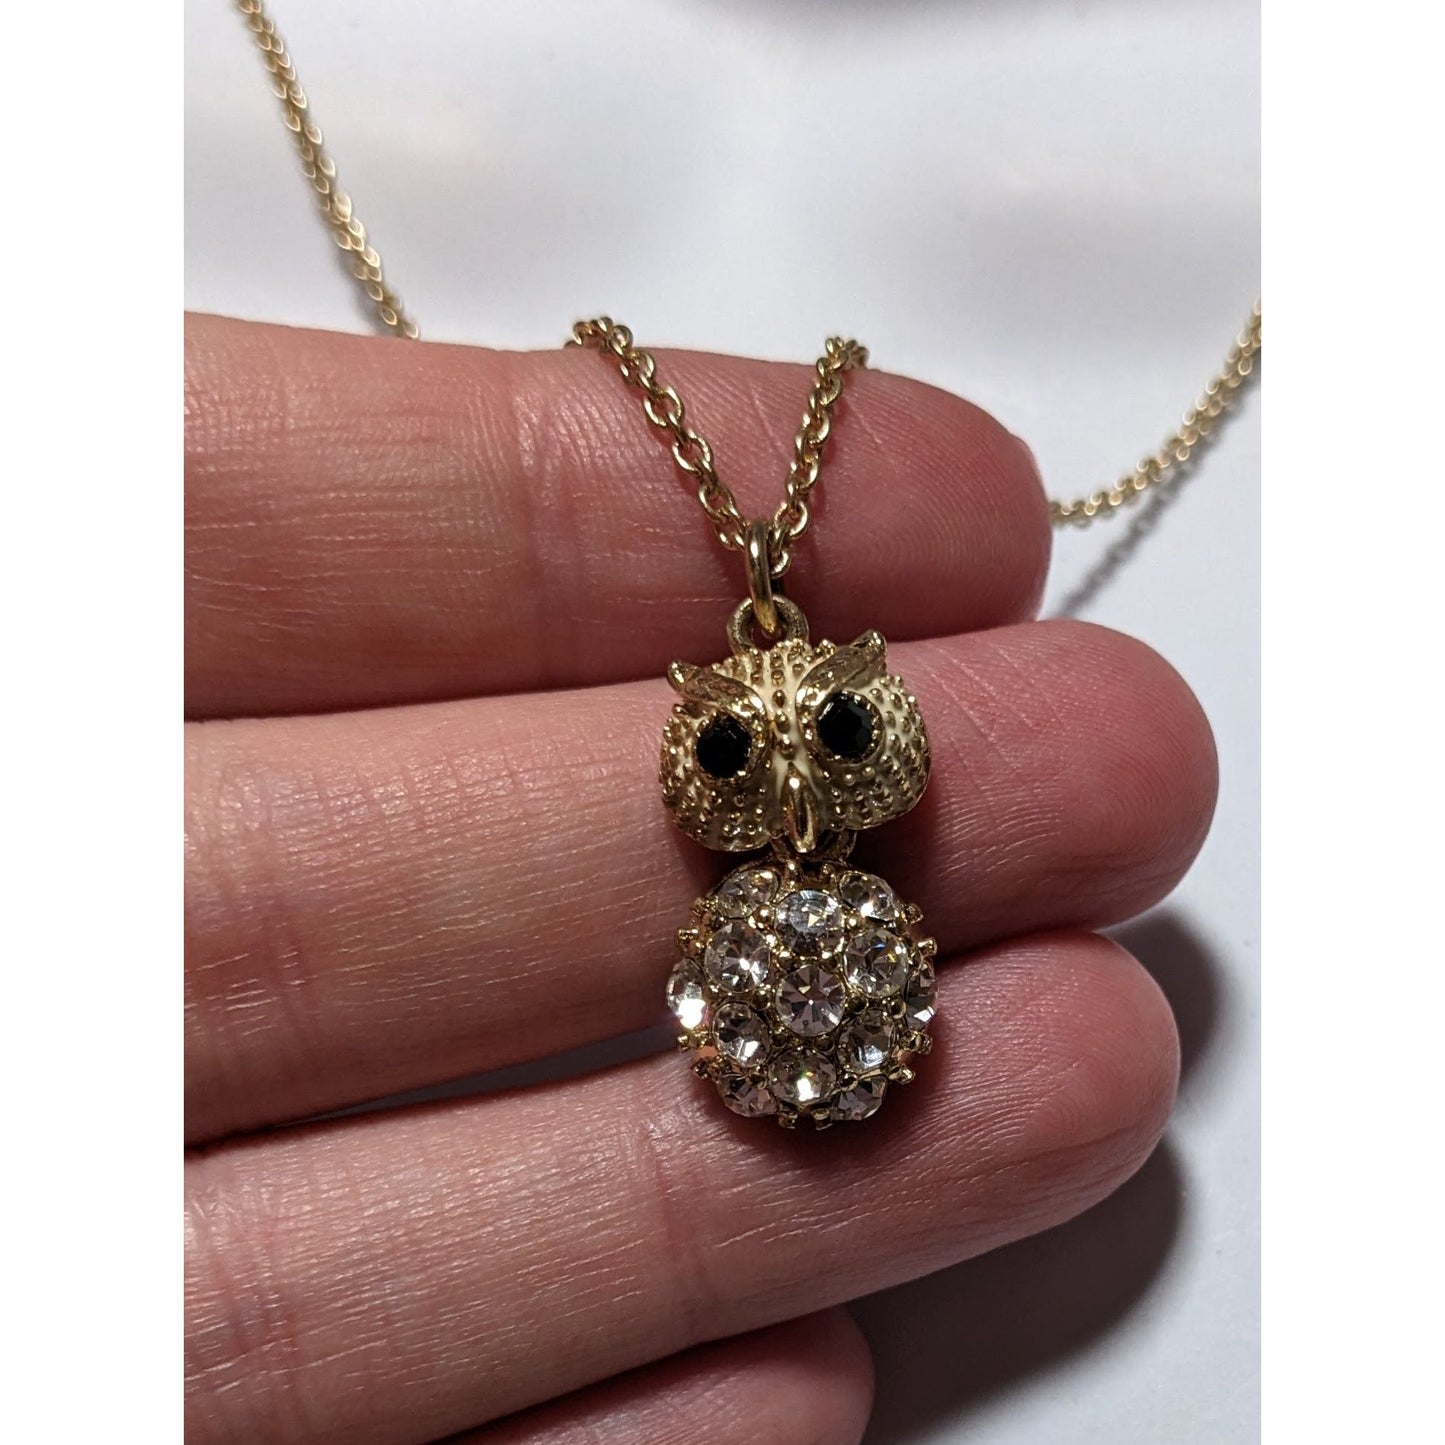 Baby Owl Pendant Necklace